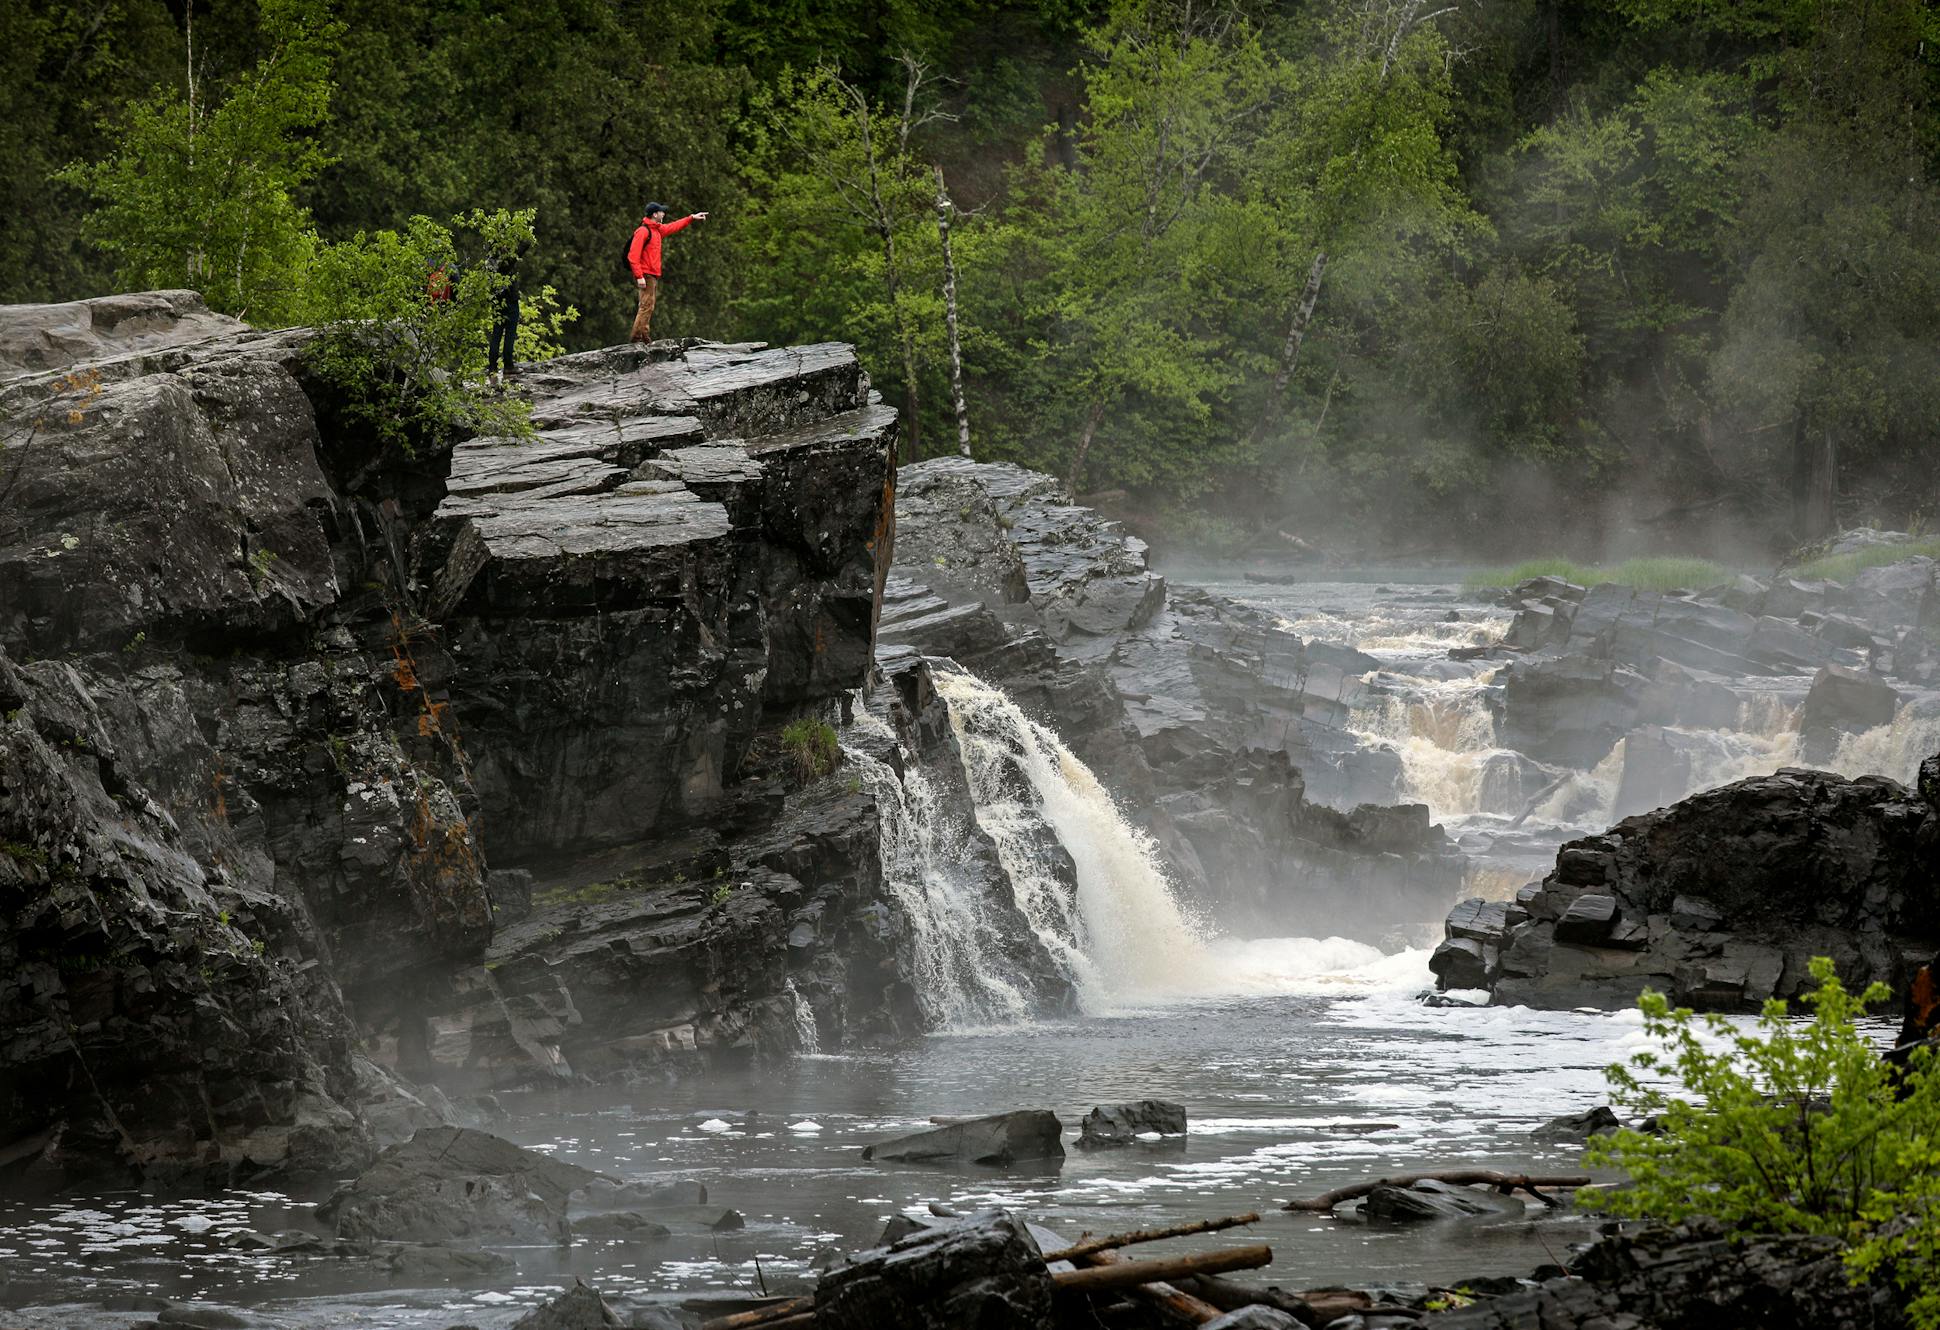 The trail that bypassed the spectacular rocky gorge of the lower St. Louis River was called the Grand Portage. 